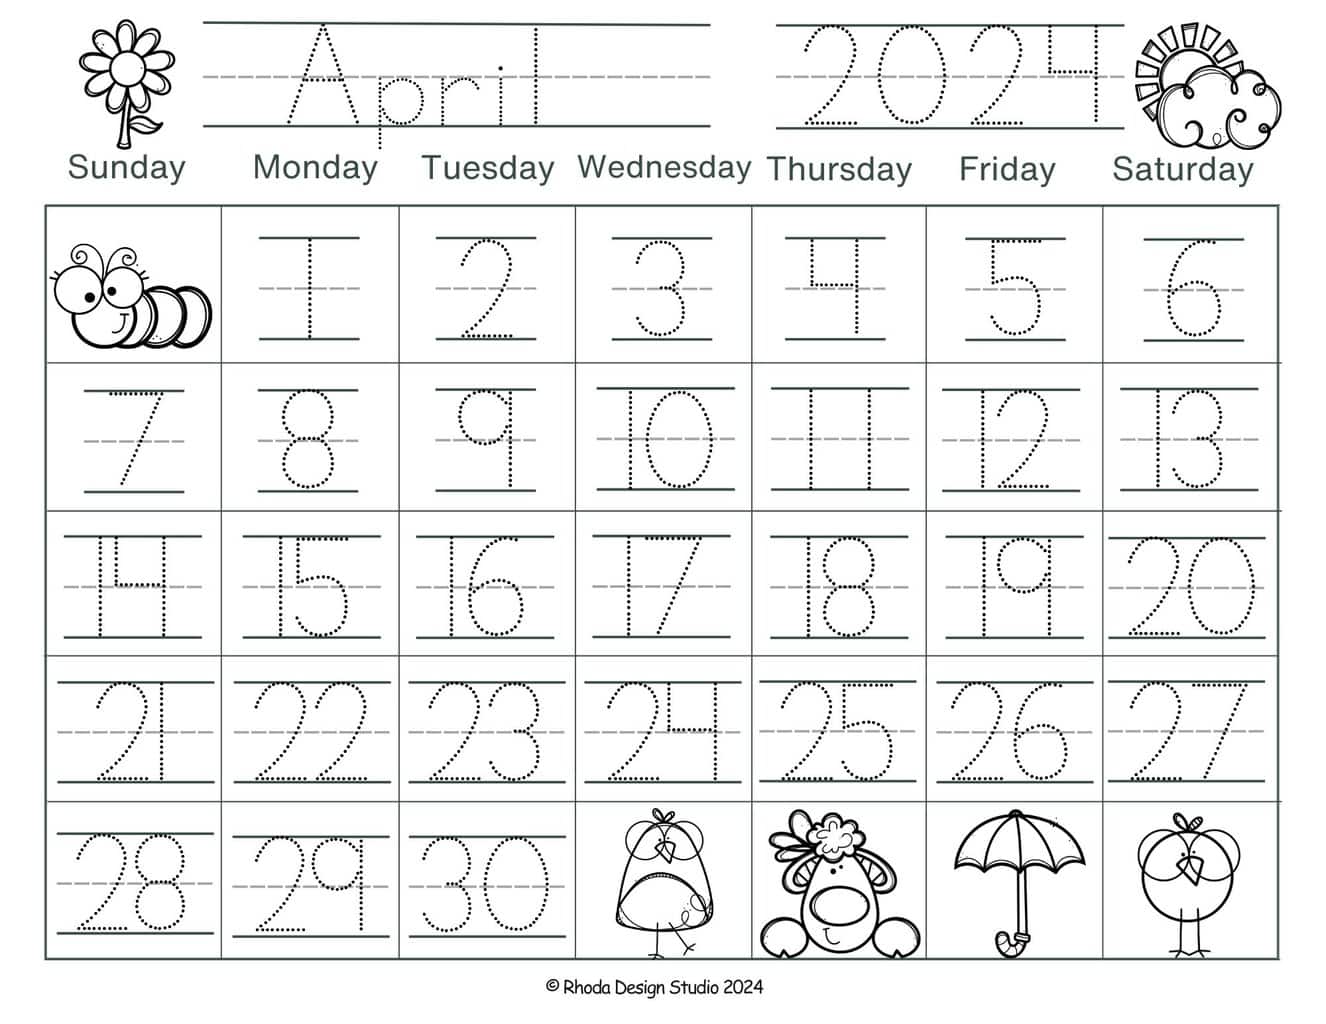 traceable-numbers-april-calendar-with-numbers